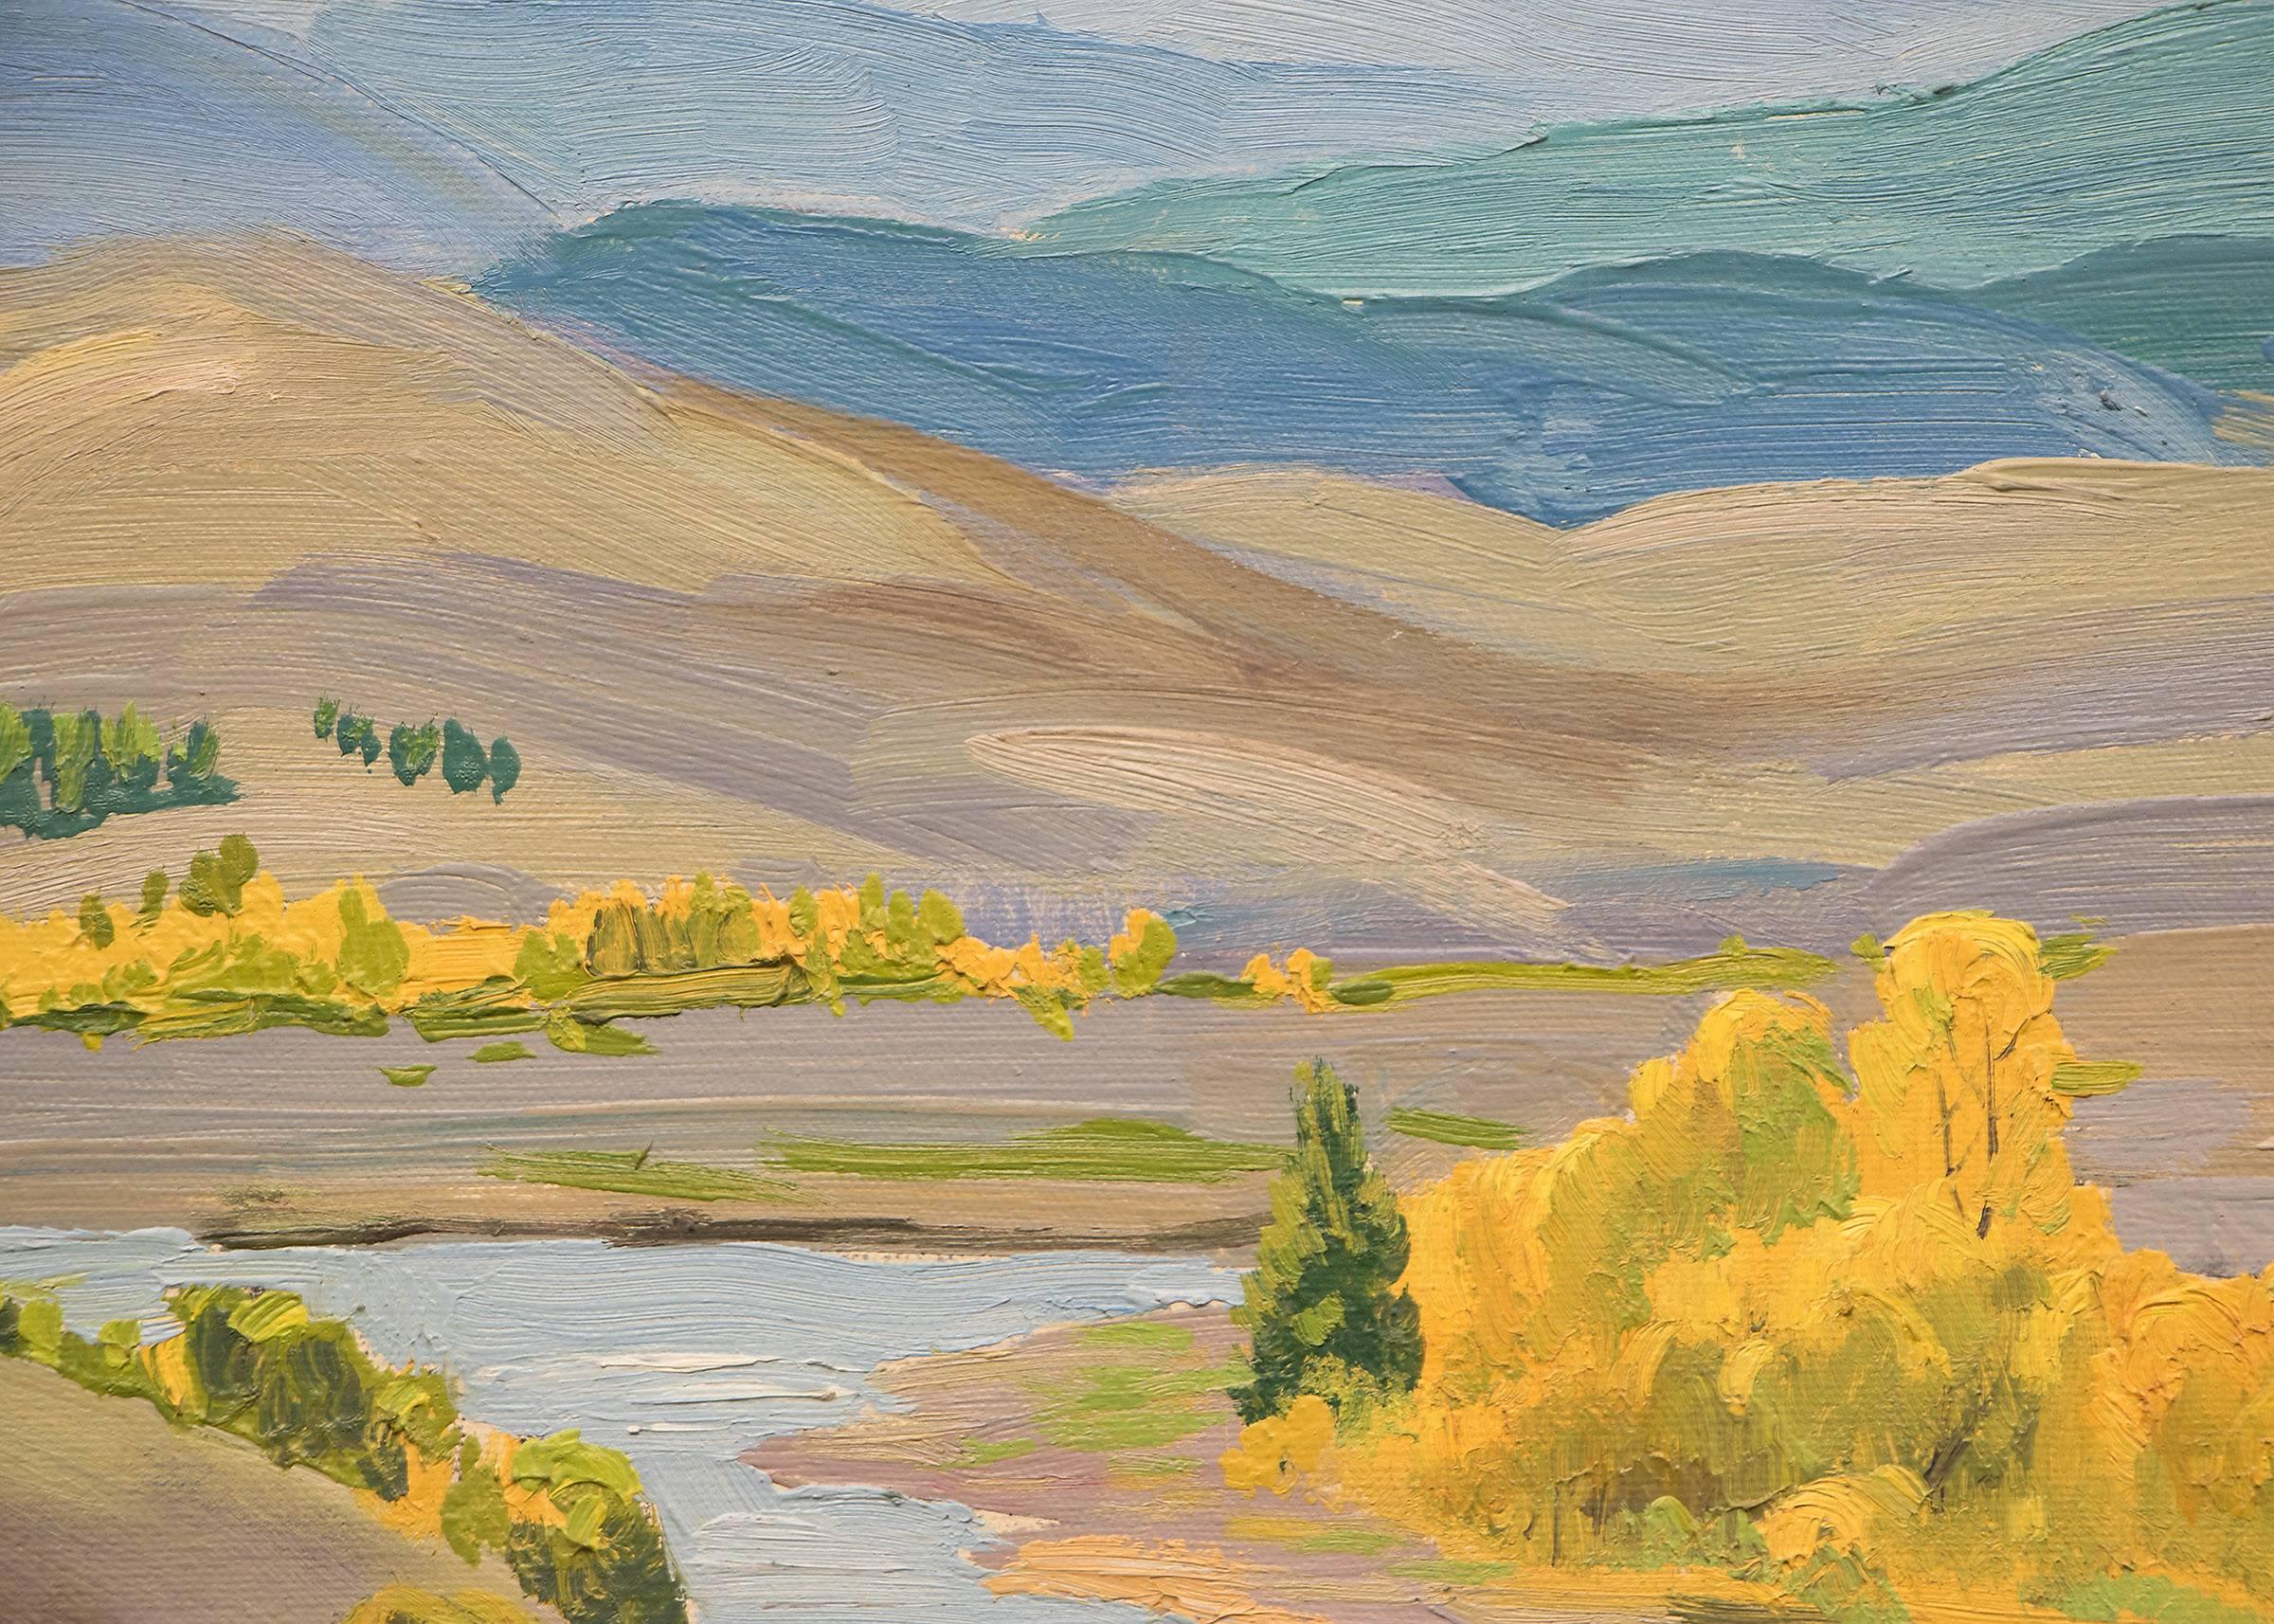 Colorado River - Painting by Alfred Wands